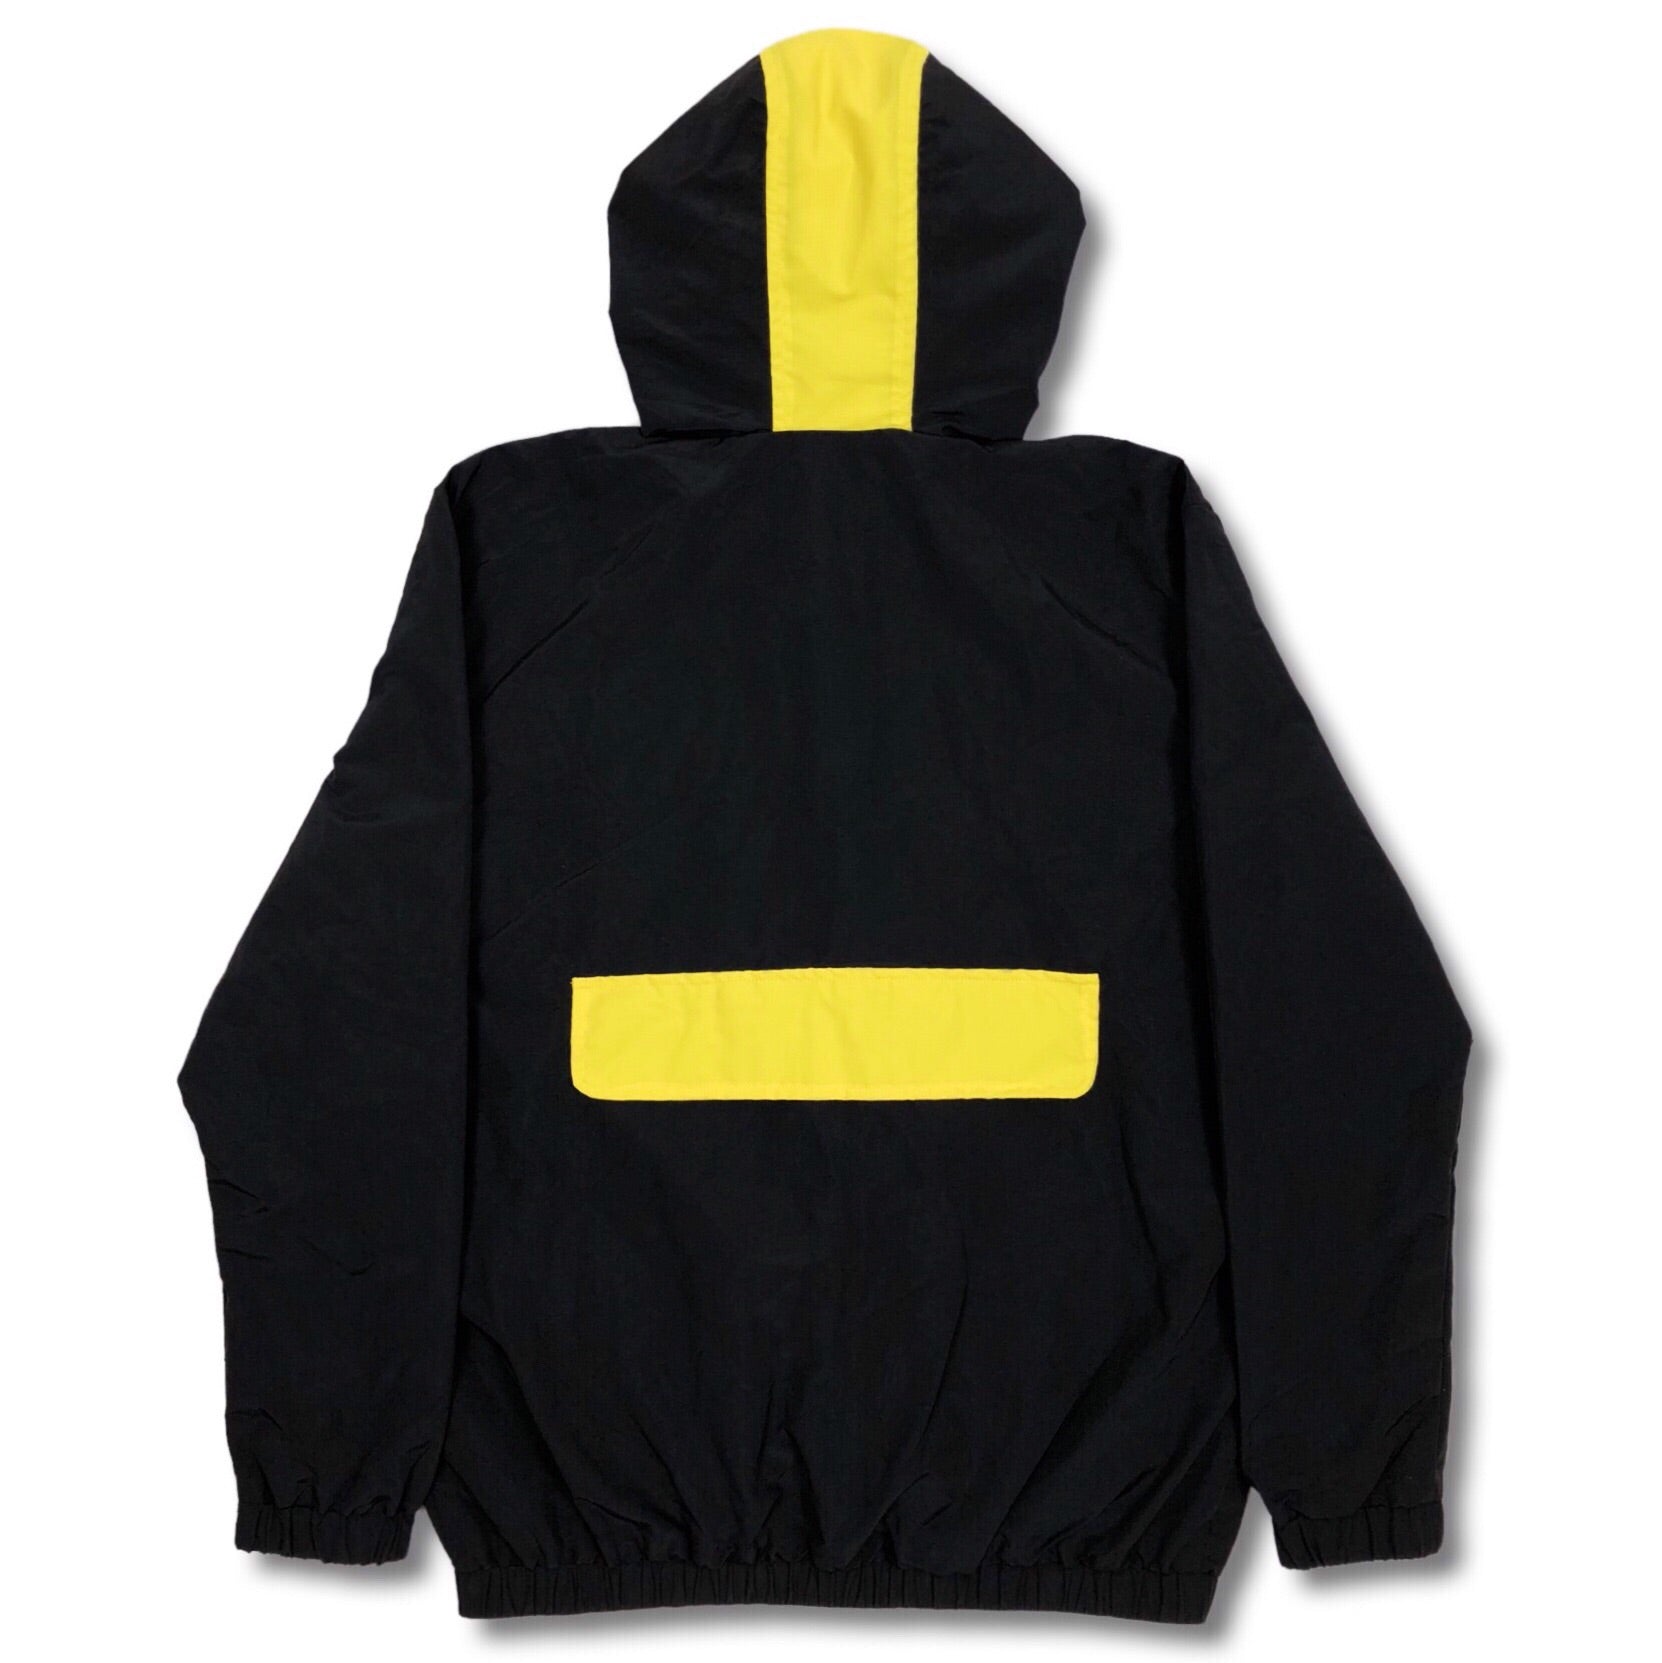 Stealth Hooded Tracksuit Jacket - Black/Yellow Bledwear Bled 